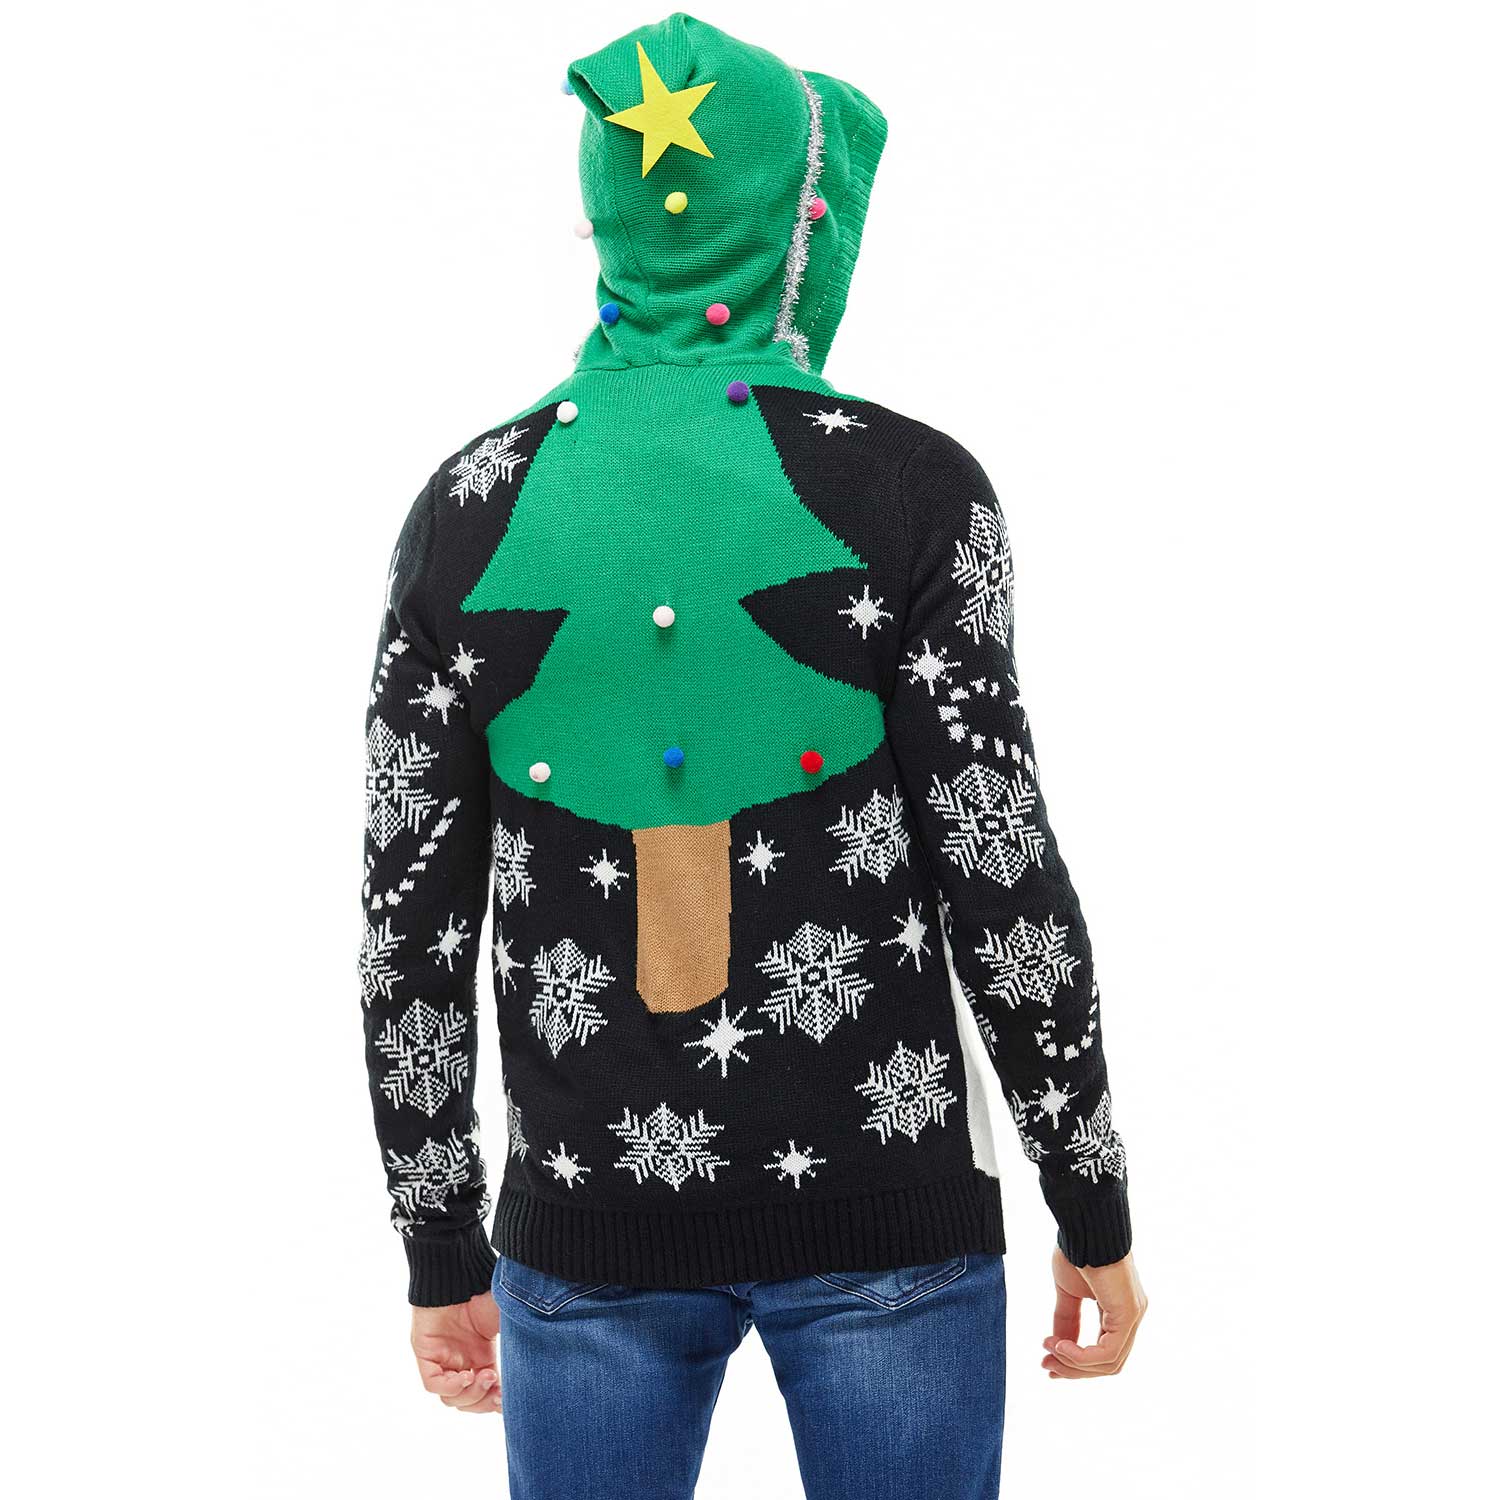 A Tinseltown Take on A Mens Knitted Funny Christmas Sweater Hoodie